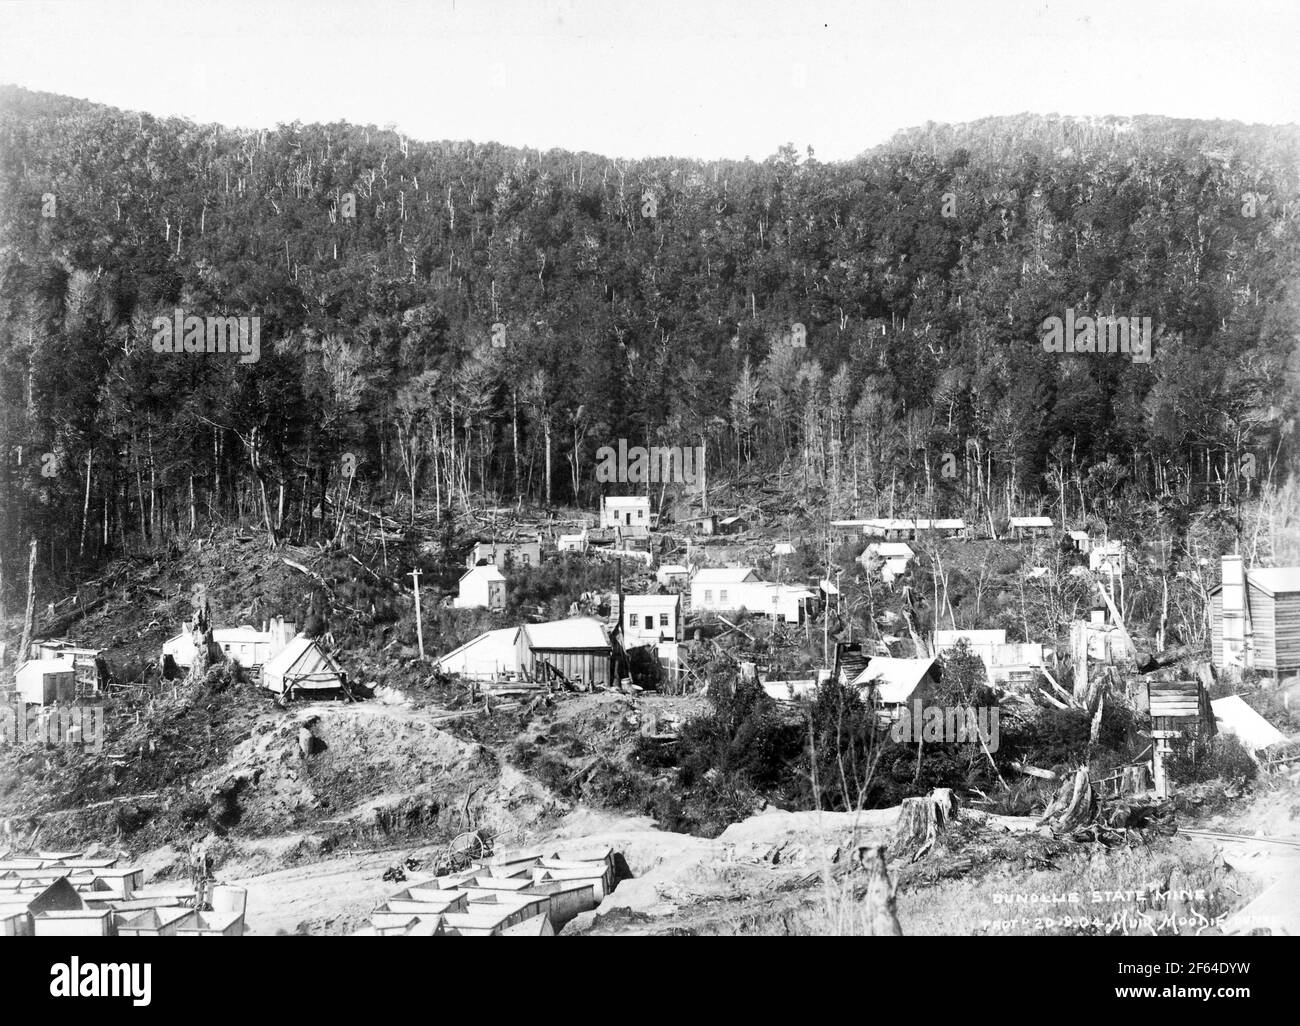 Buildings and infrastructure at Dunollie coal mine, New Zealand, circa 1910. Photo by Muir Moodie of Dunedin Stock Photo